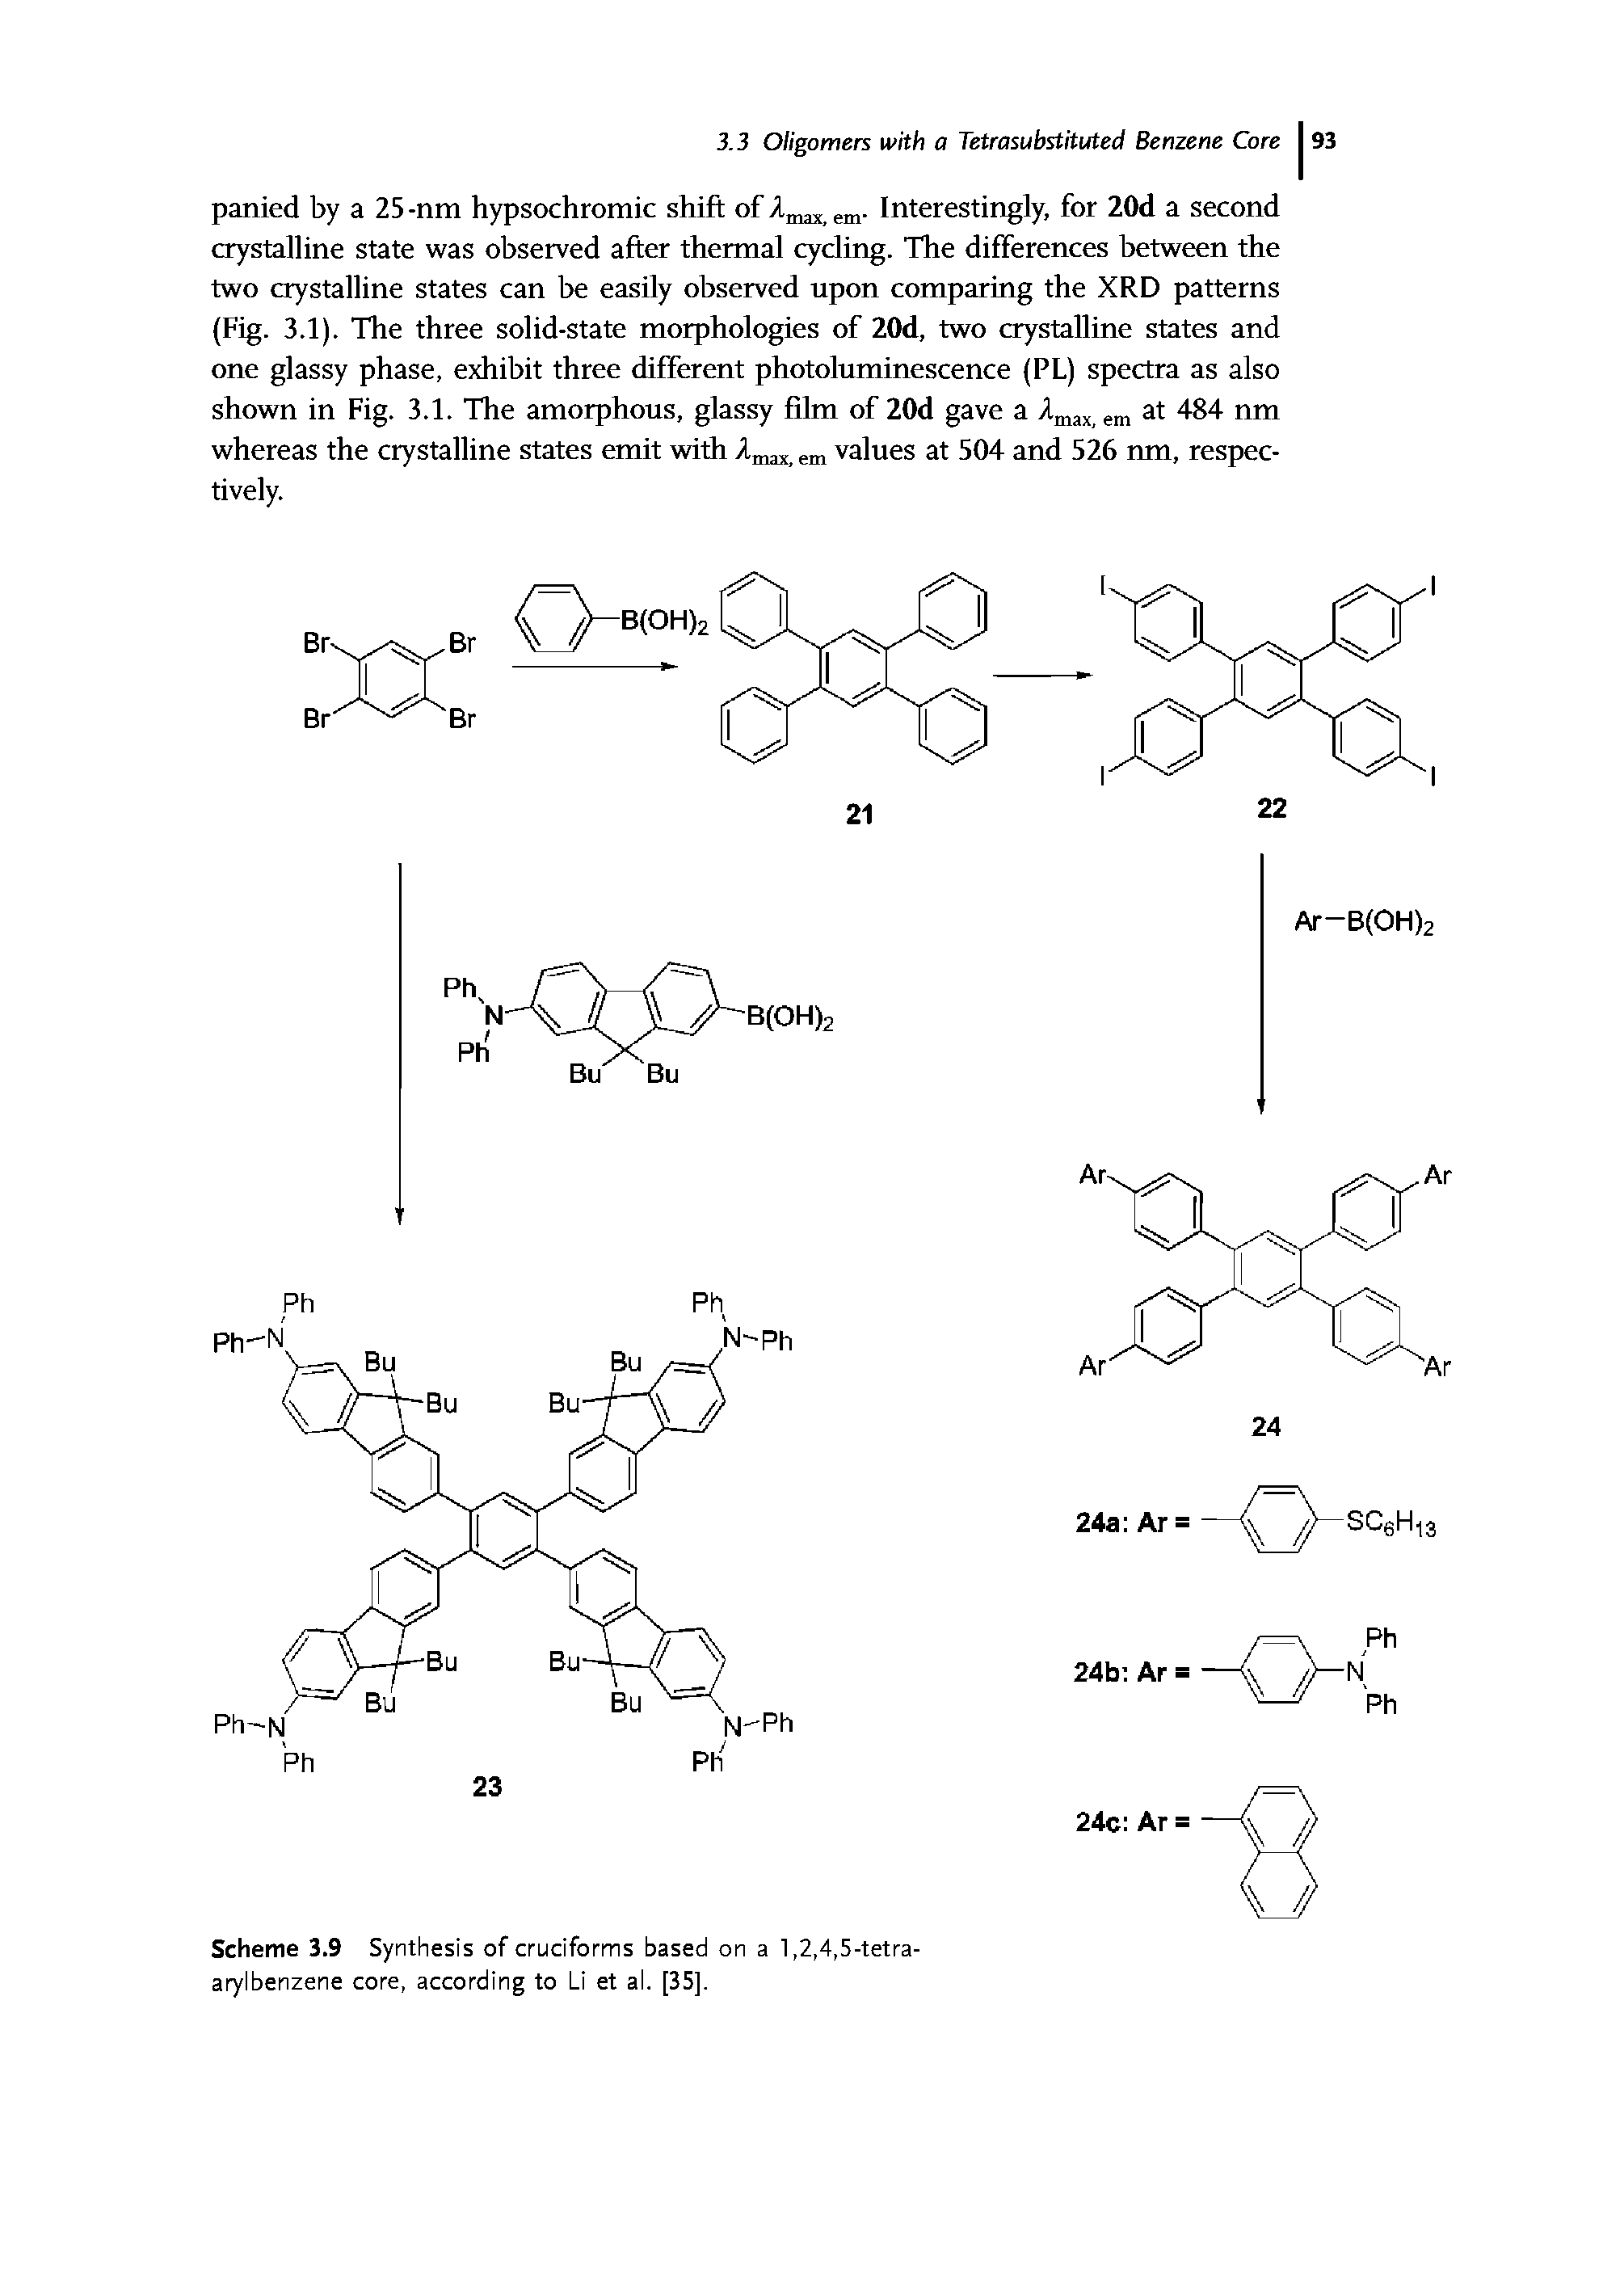 Scheme 3.9 Synthesis of cruciforms based on a 1,2,4,5-tetra-arylbenzene core, according to Li et al. [35],...